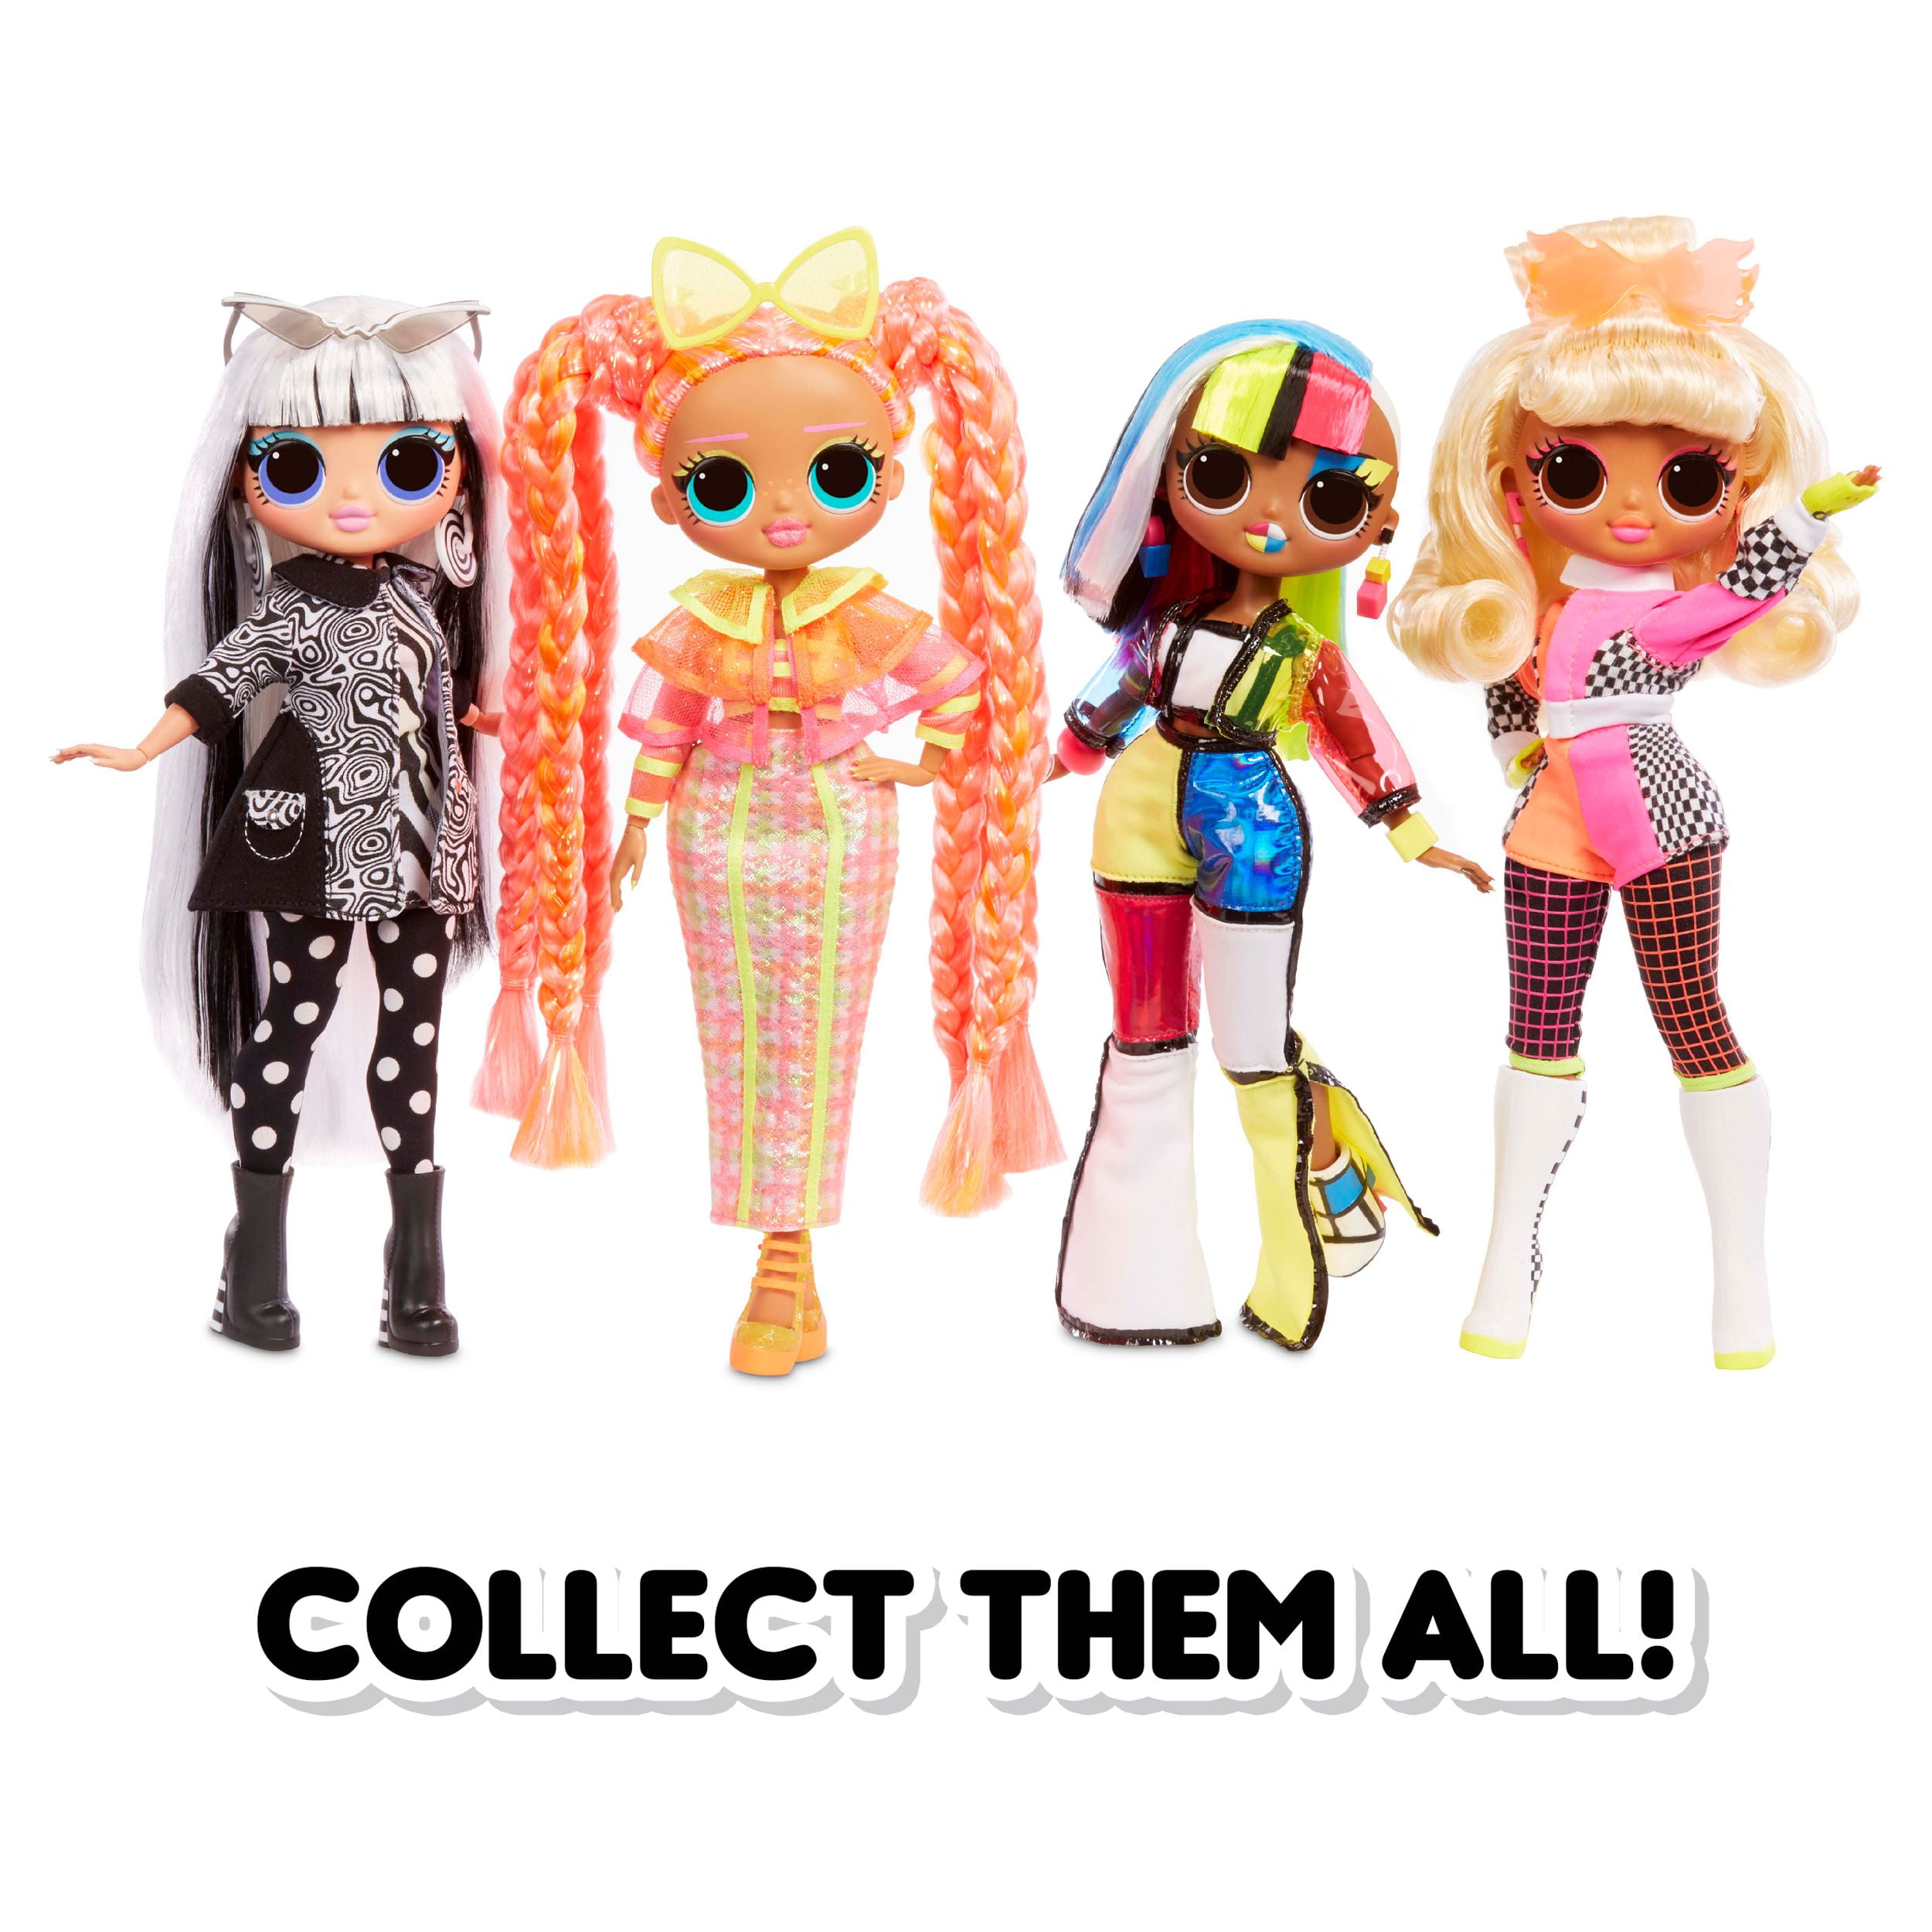 The New L.O.L. Dolls Your Kids Need: O.M.G. Lights! - The Toy Insider